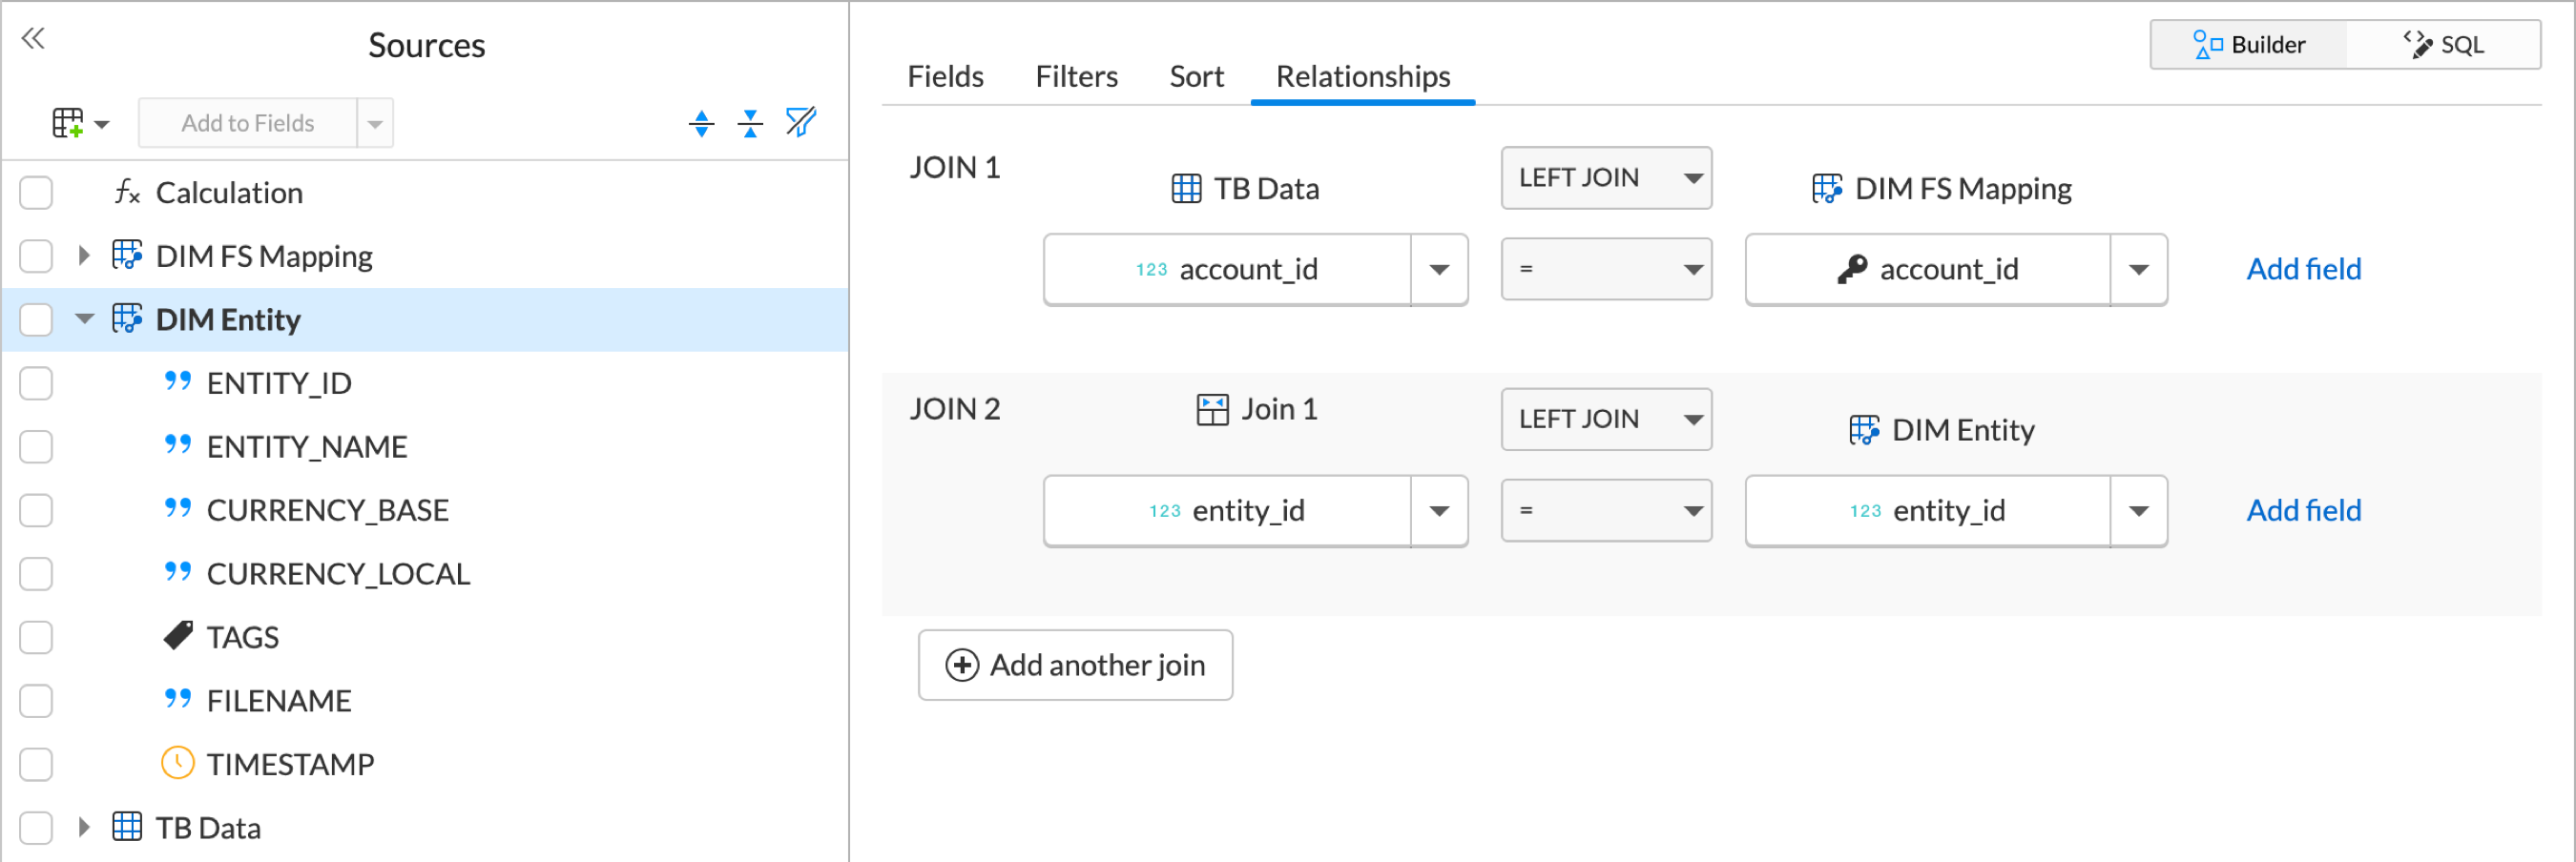 get-started-query-relationships-join2.png